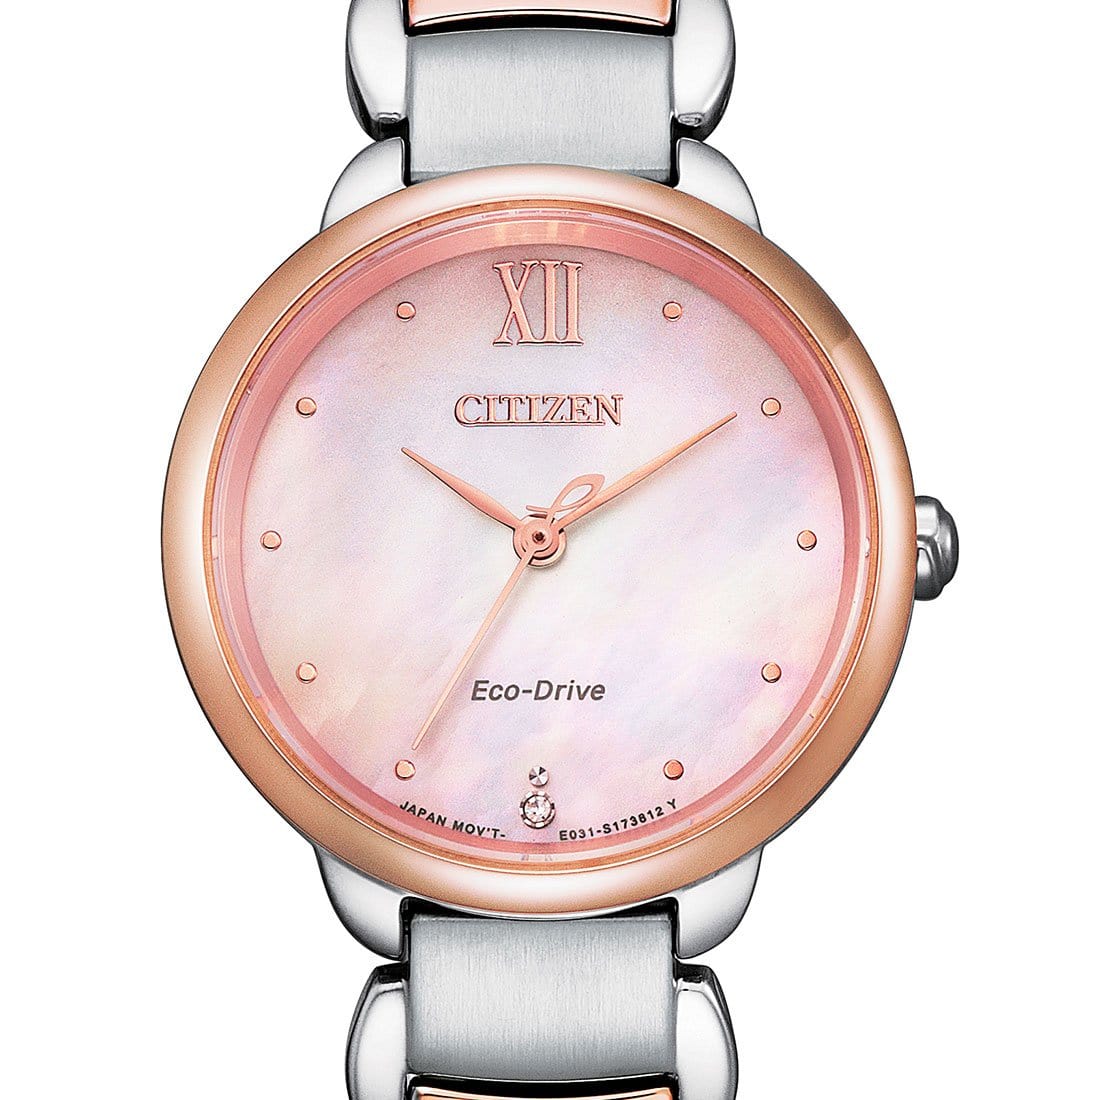 Citizen L Eco-Drive Analog Ladies Mother of Pearl Dial Dress Watch EM0924-85Y